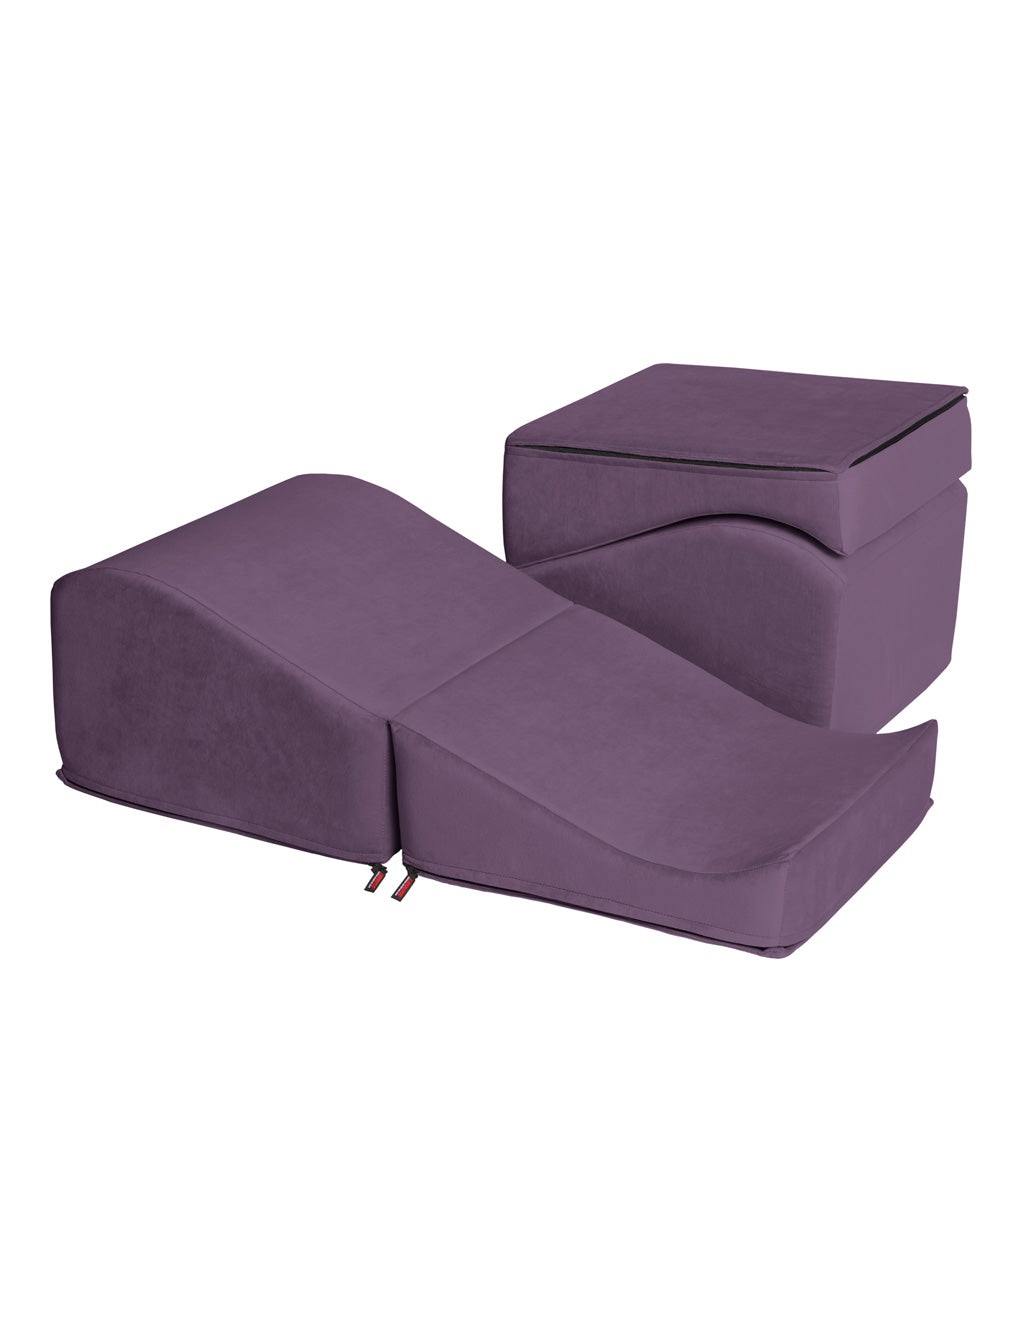 Liberator Flip Ramp Position Aid- Plum- Open and closed